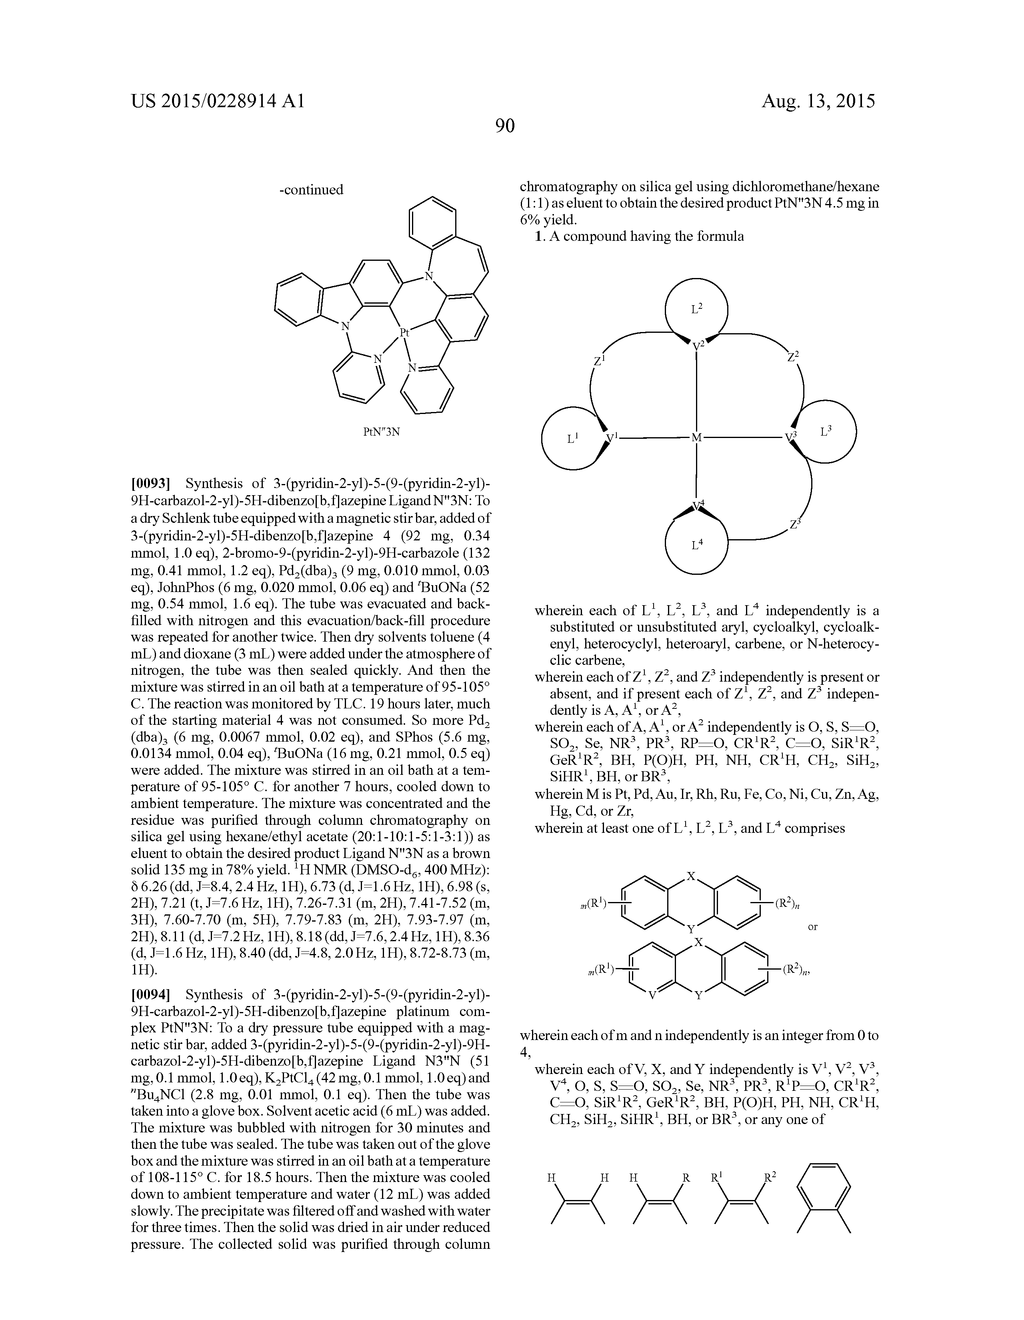 METAL COMPOUNDS, METHODS, AND USES THEREOF - diagram, schematic, and image 92